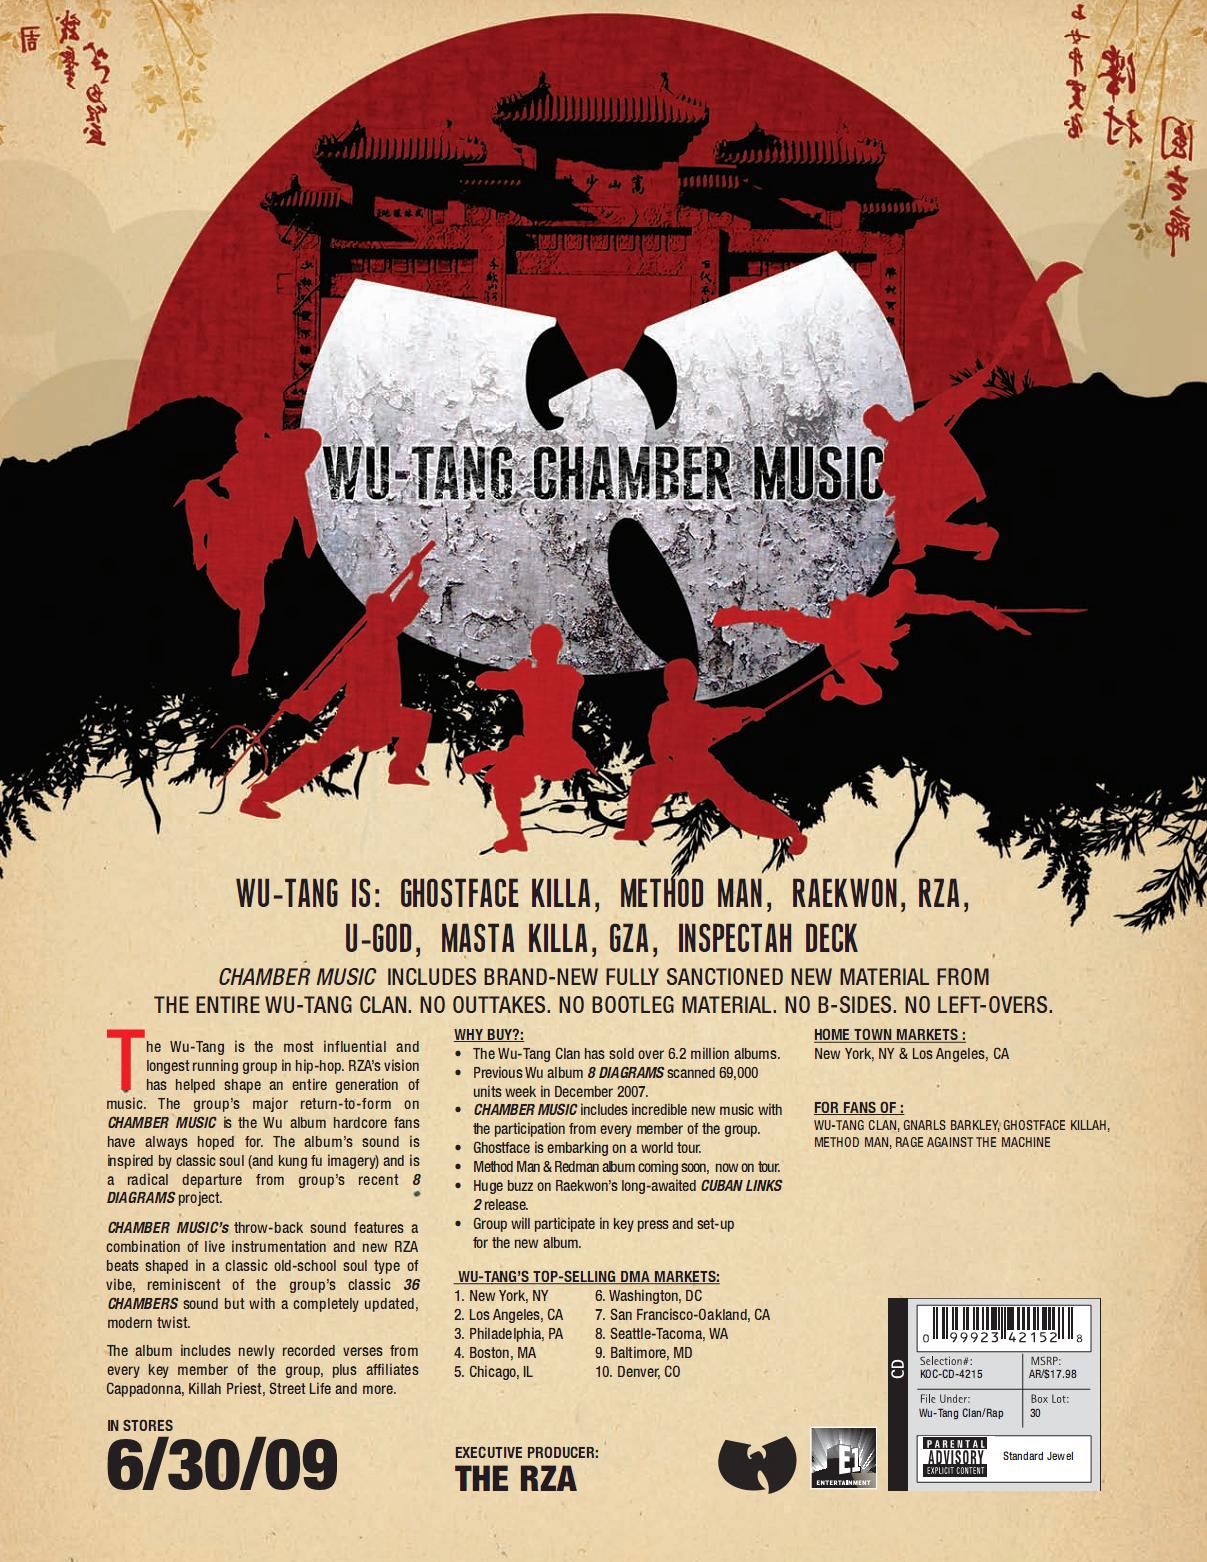 a promo for the Wu-Tang Chamber Music album